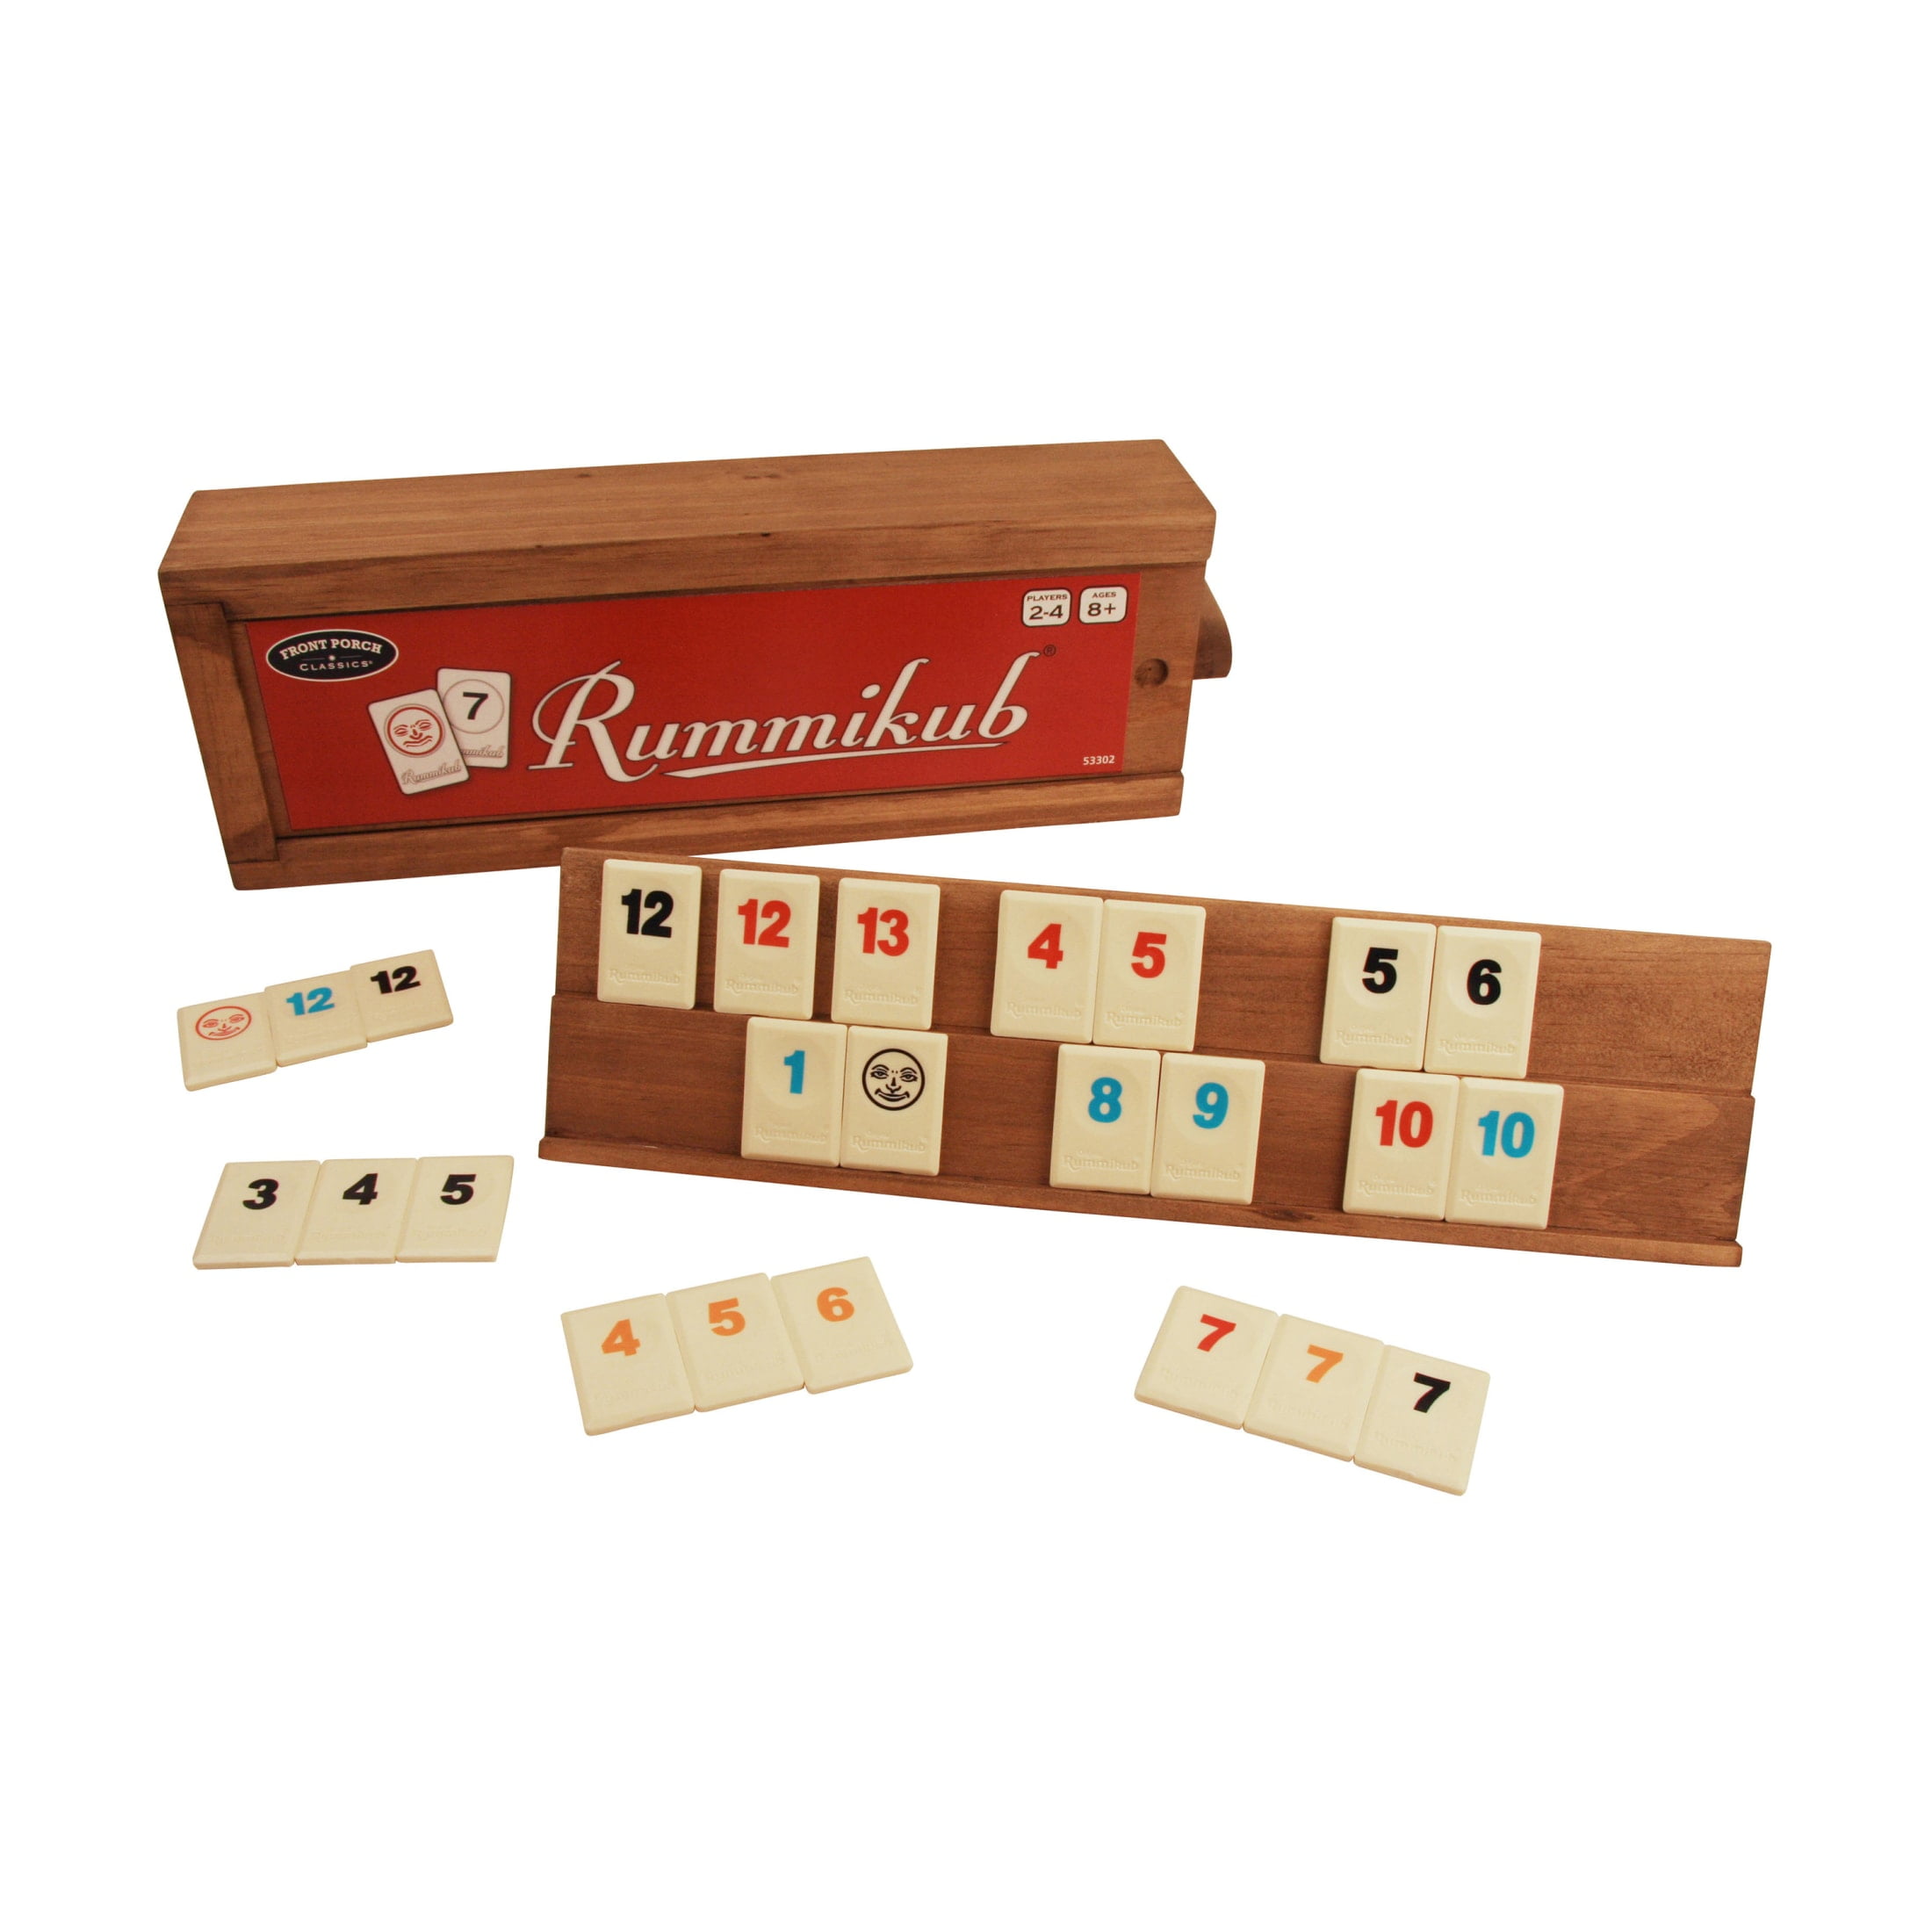 The Original Rummy Tile Game Rummikub 106 Tiles Cubes 2-4 Players Ages 8 & up for sale online 